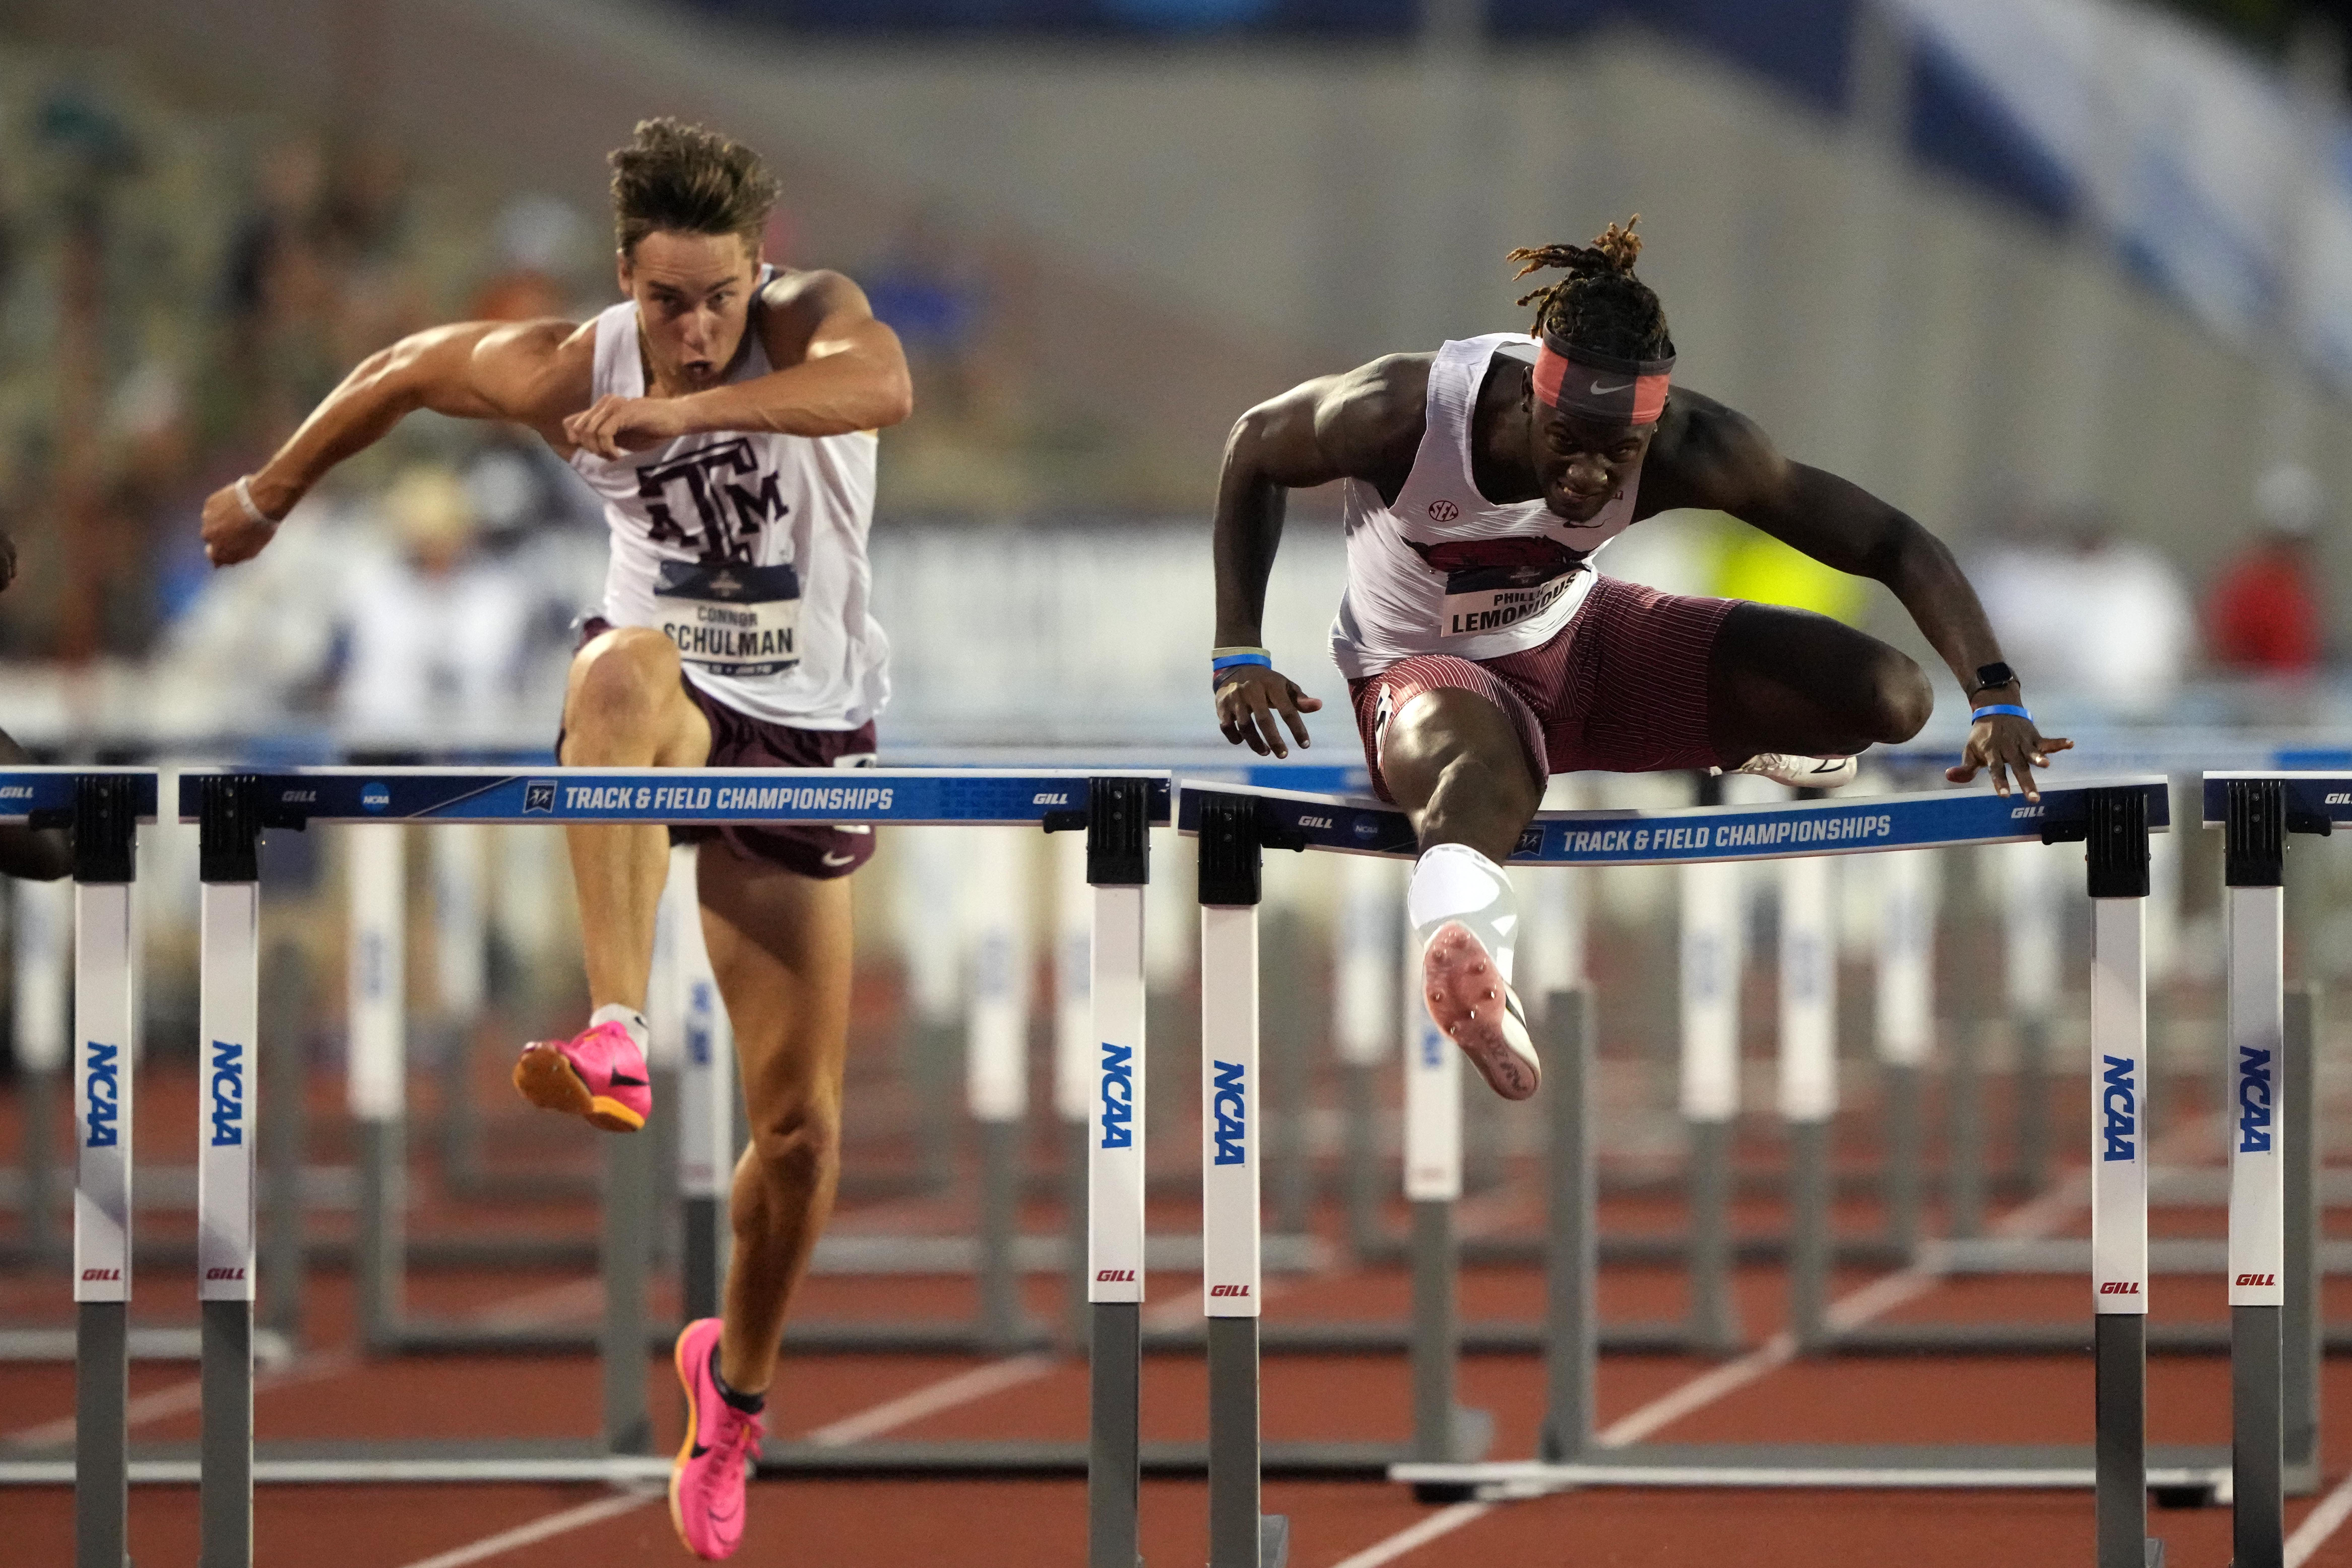 Arkansas’ struggles continue as men’s track-and-field disappoints on Day 1